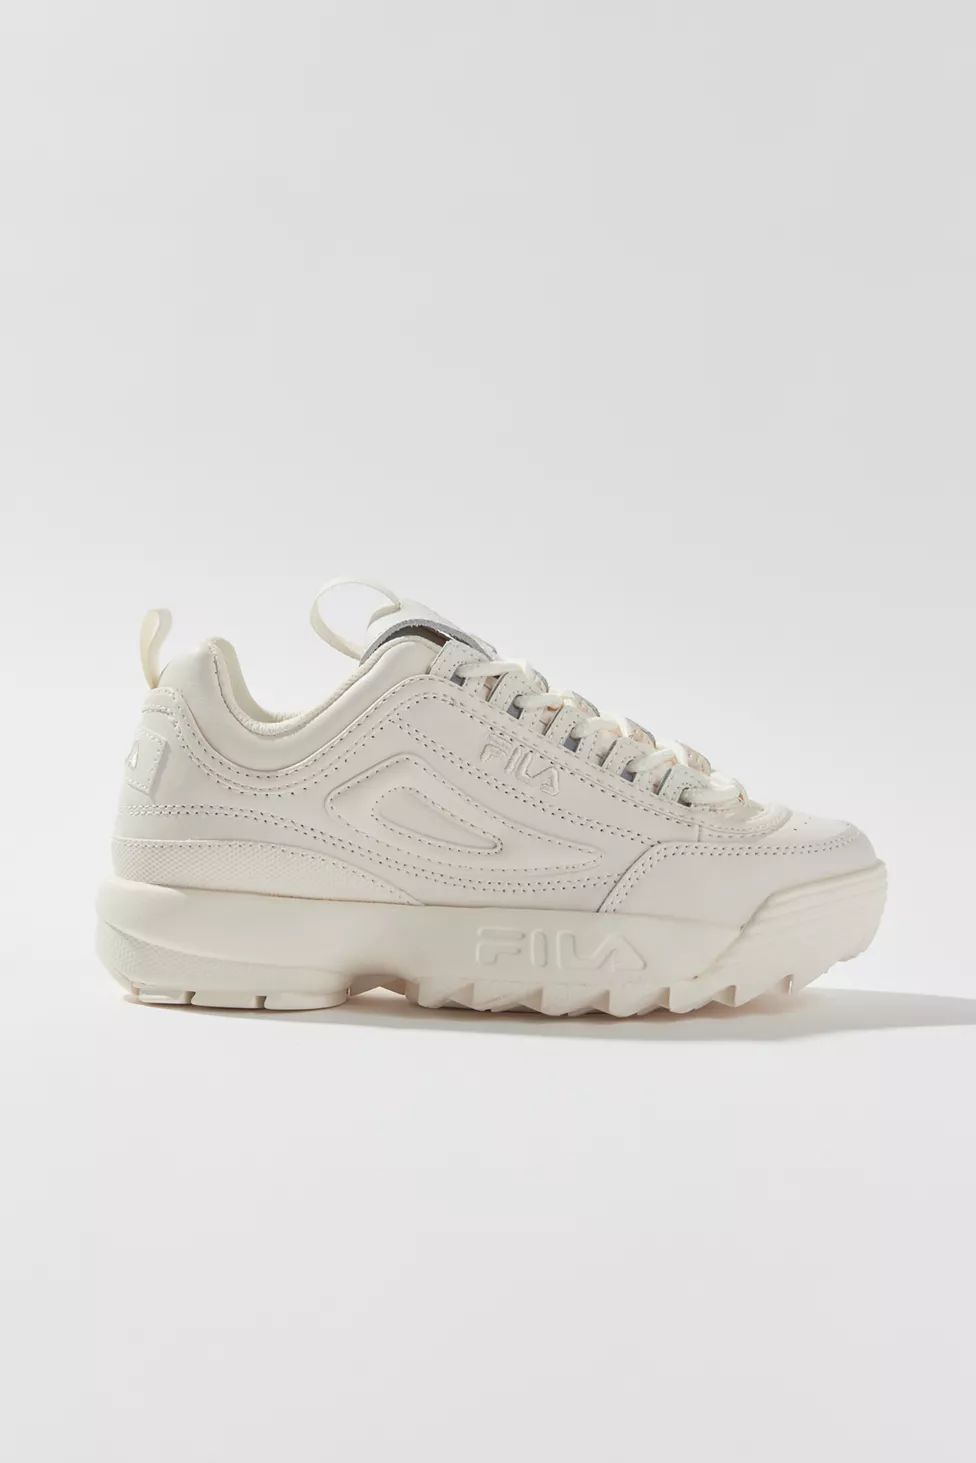 FILA Disruptor 2 Premium Sneaker | Urban Outfitters (US and RoW)